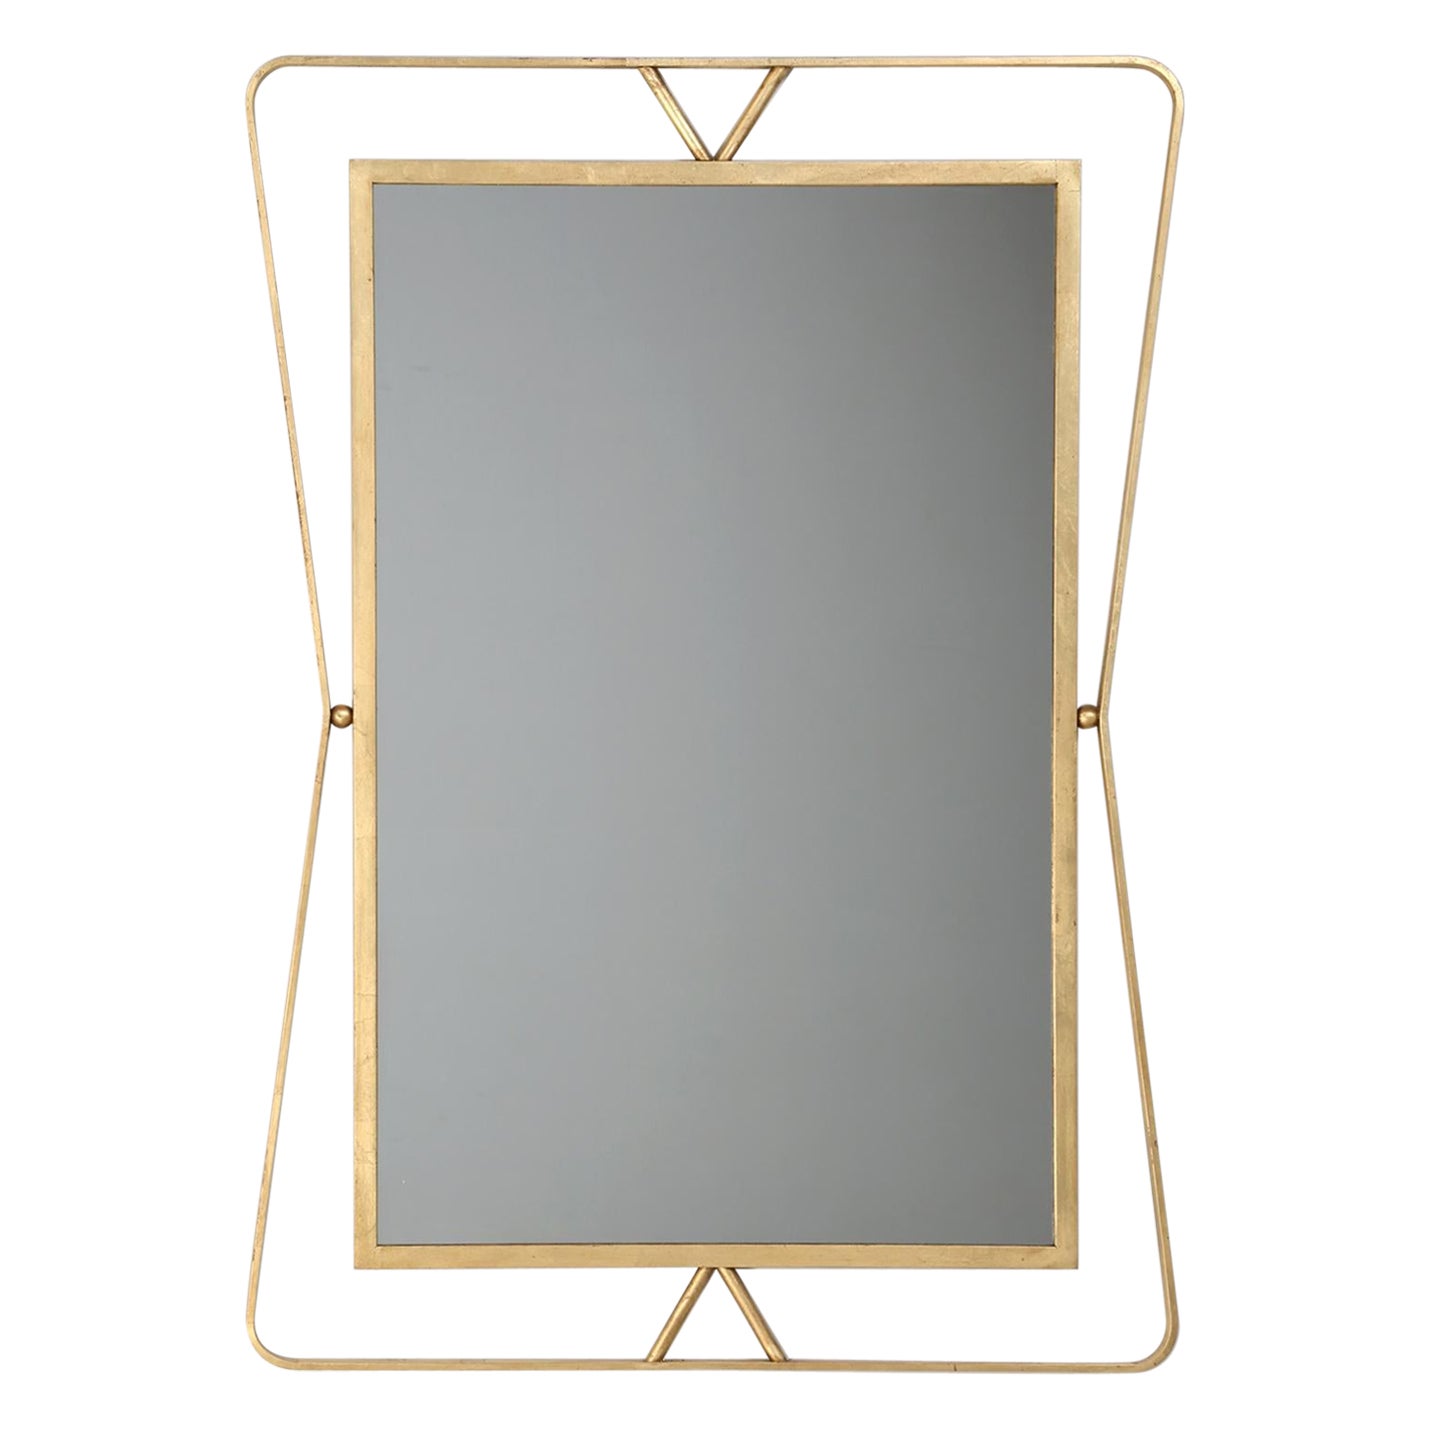 Custom Hand-Made by Old Plank Gilded Wall Mirror Available Any Dimension, Finish